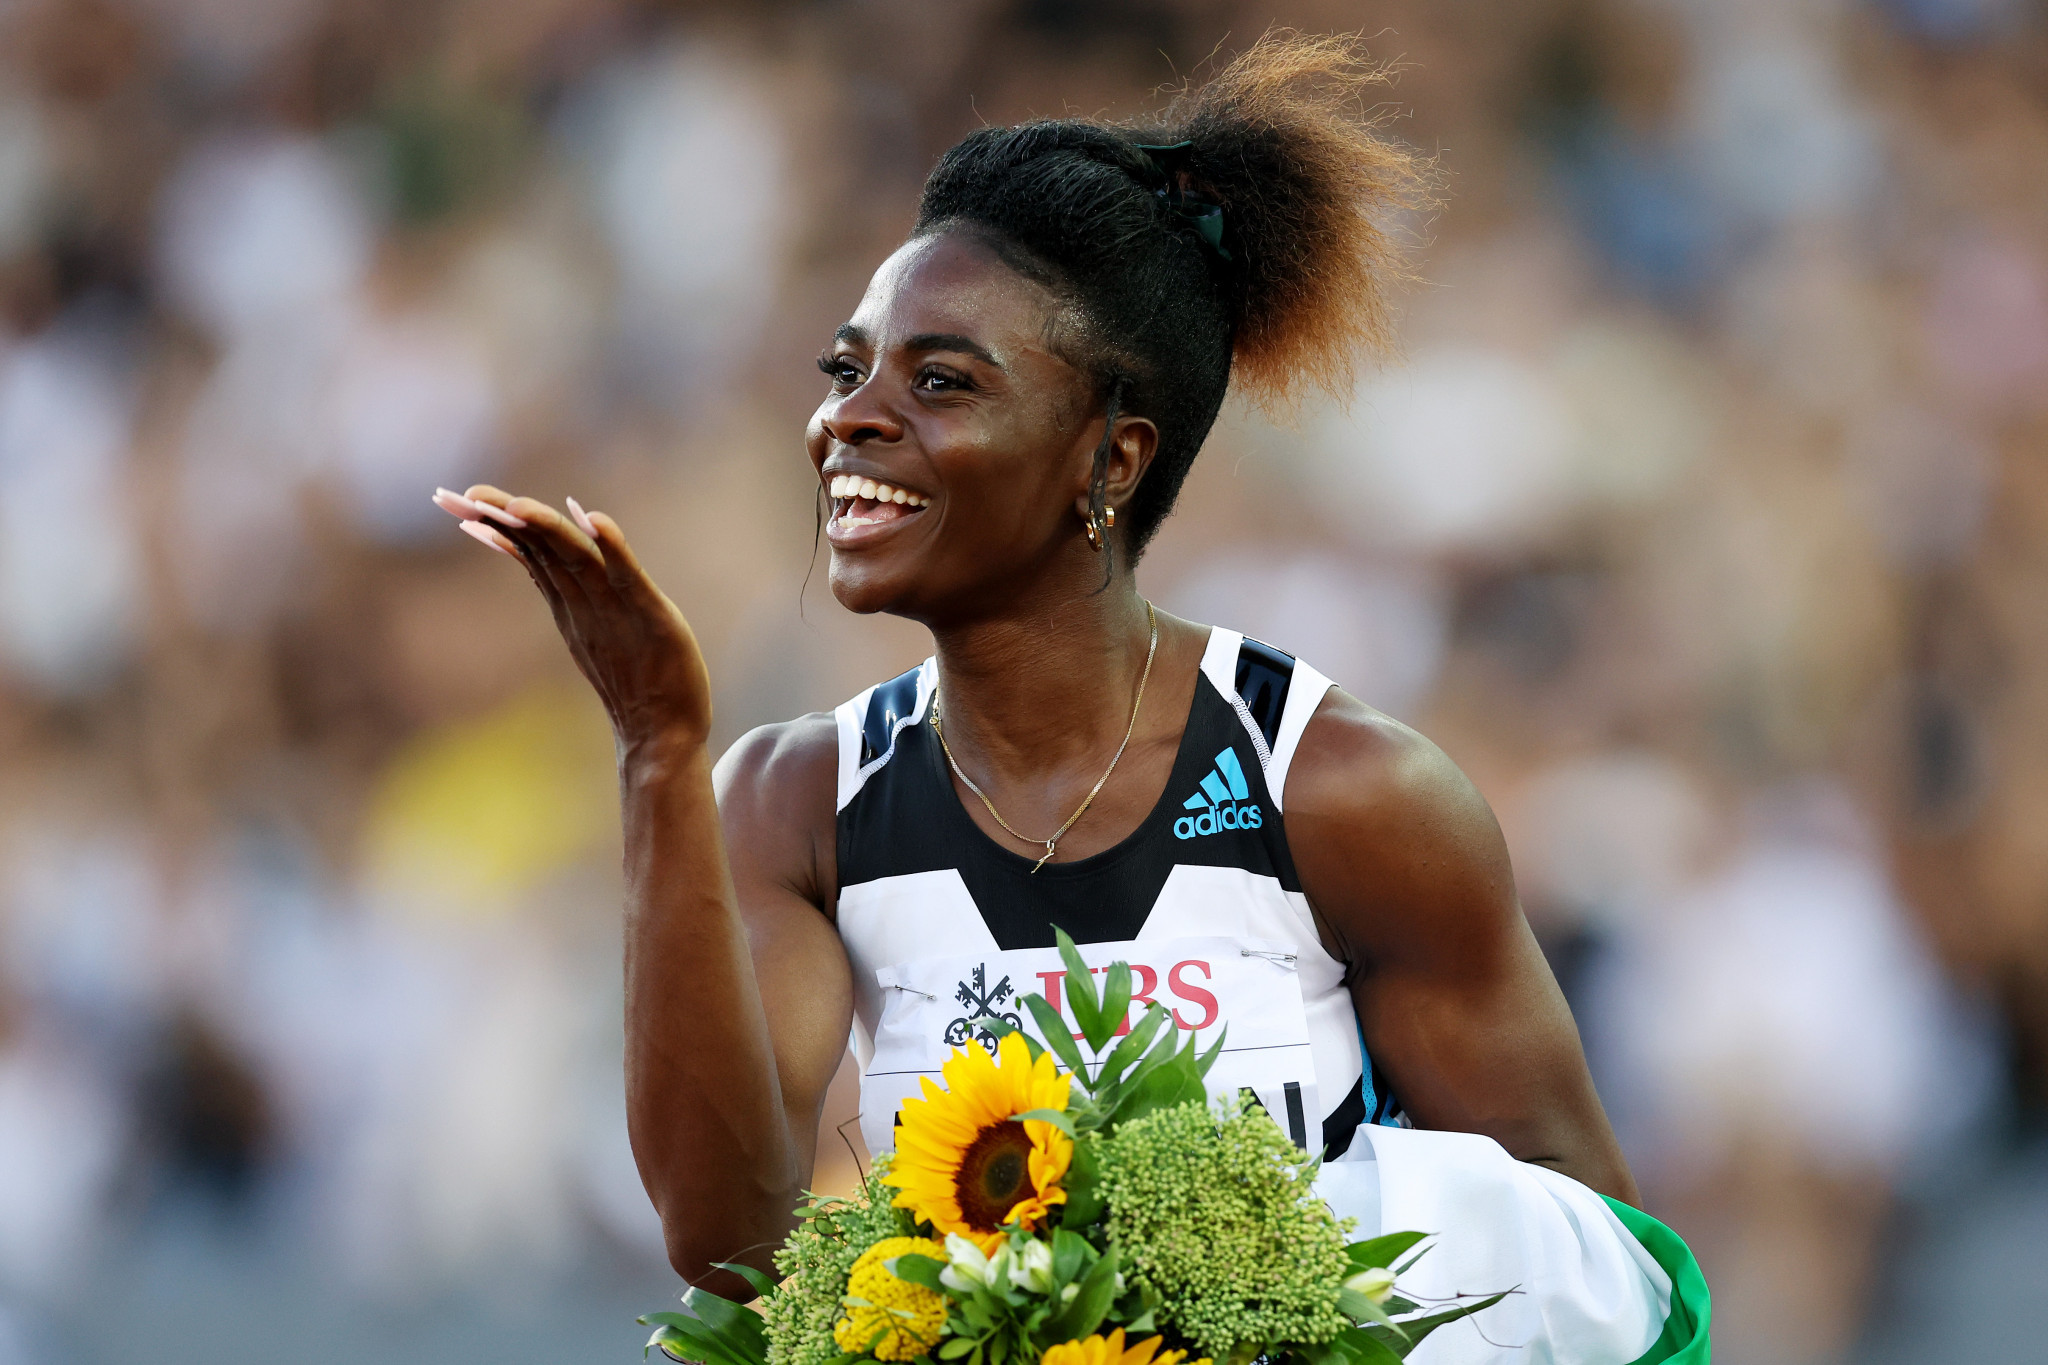 World 100m hurdles record holder Amusan announces AIU charged her with doping violation